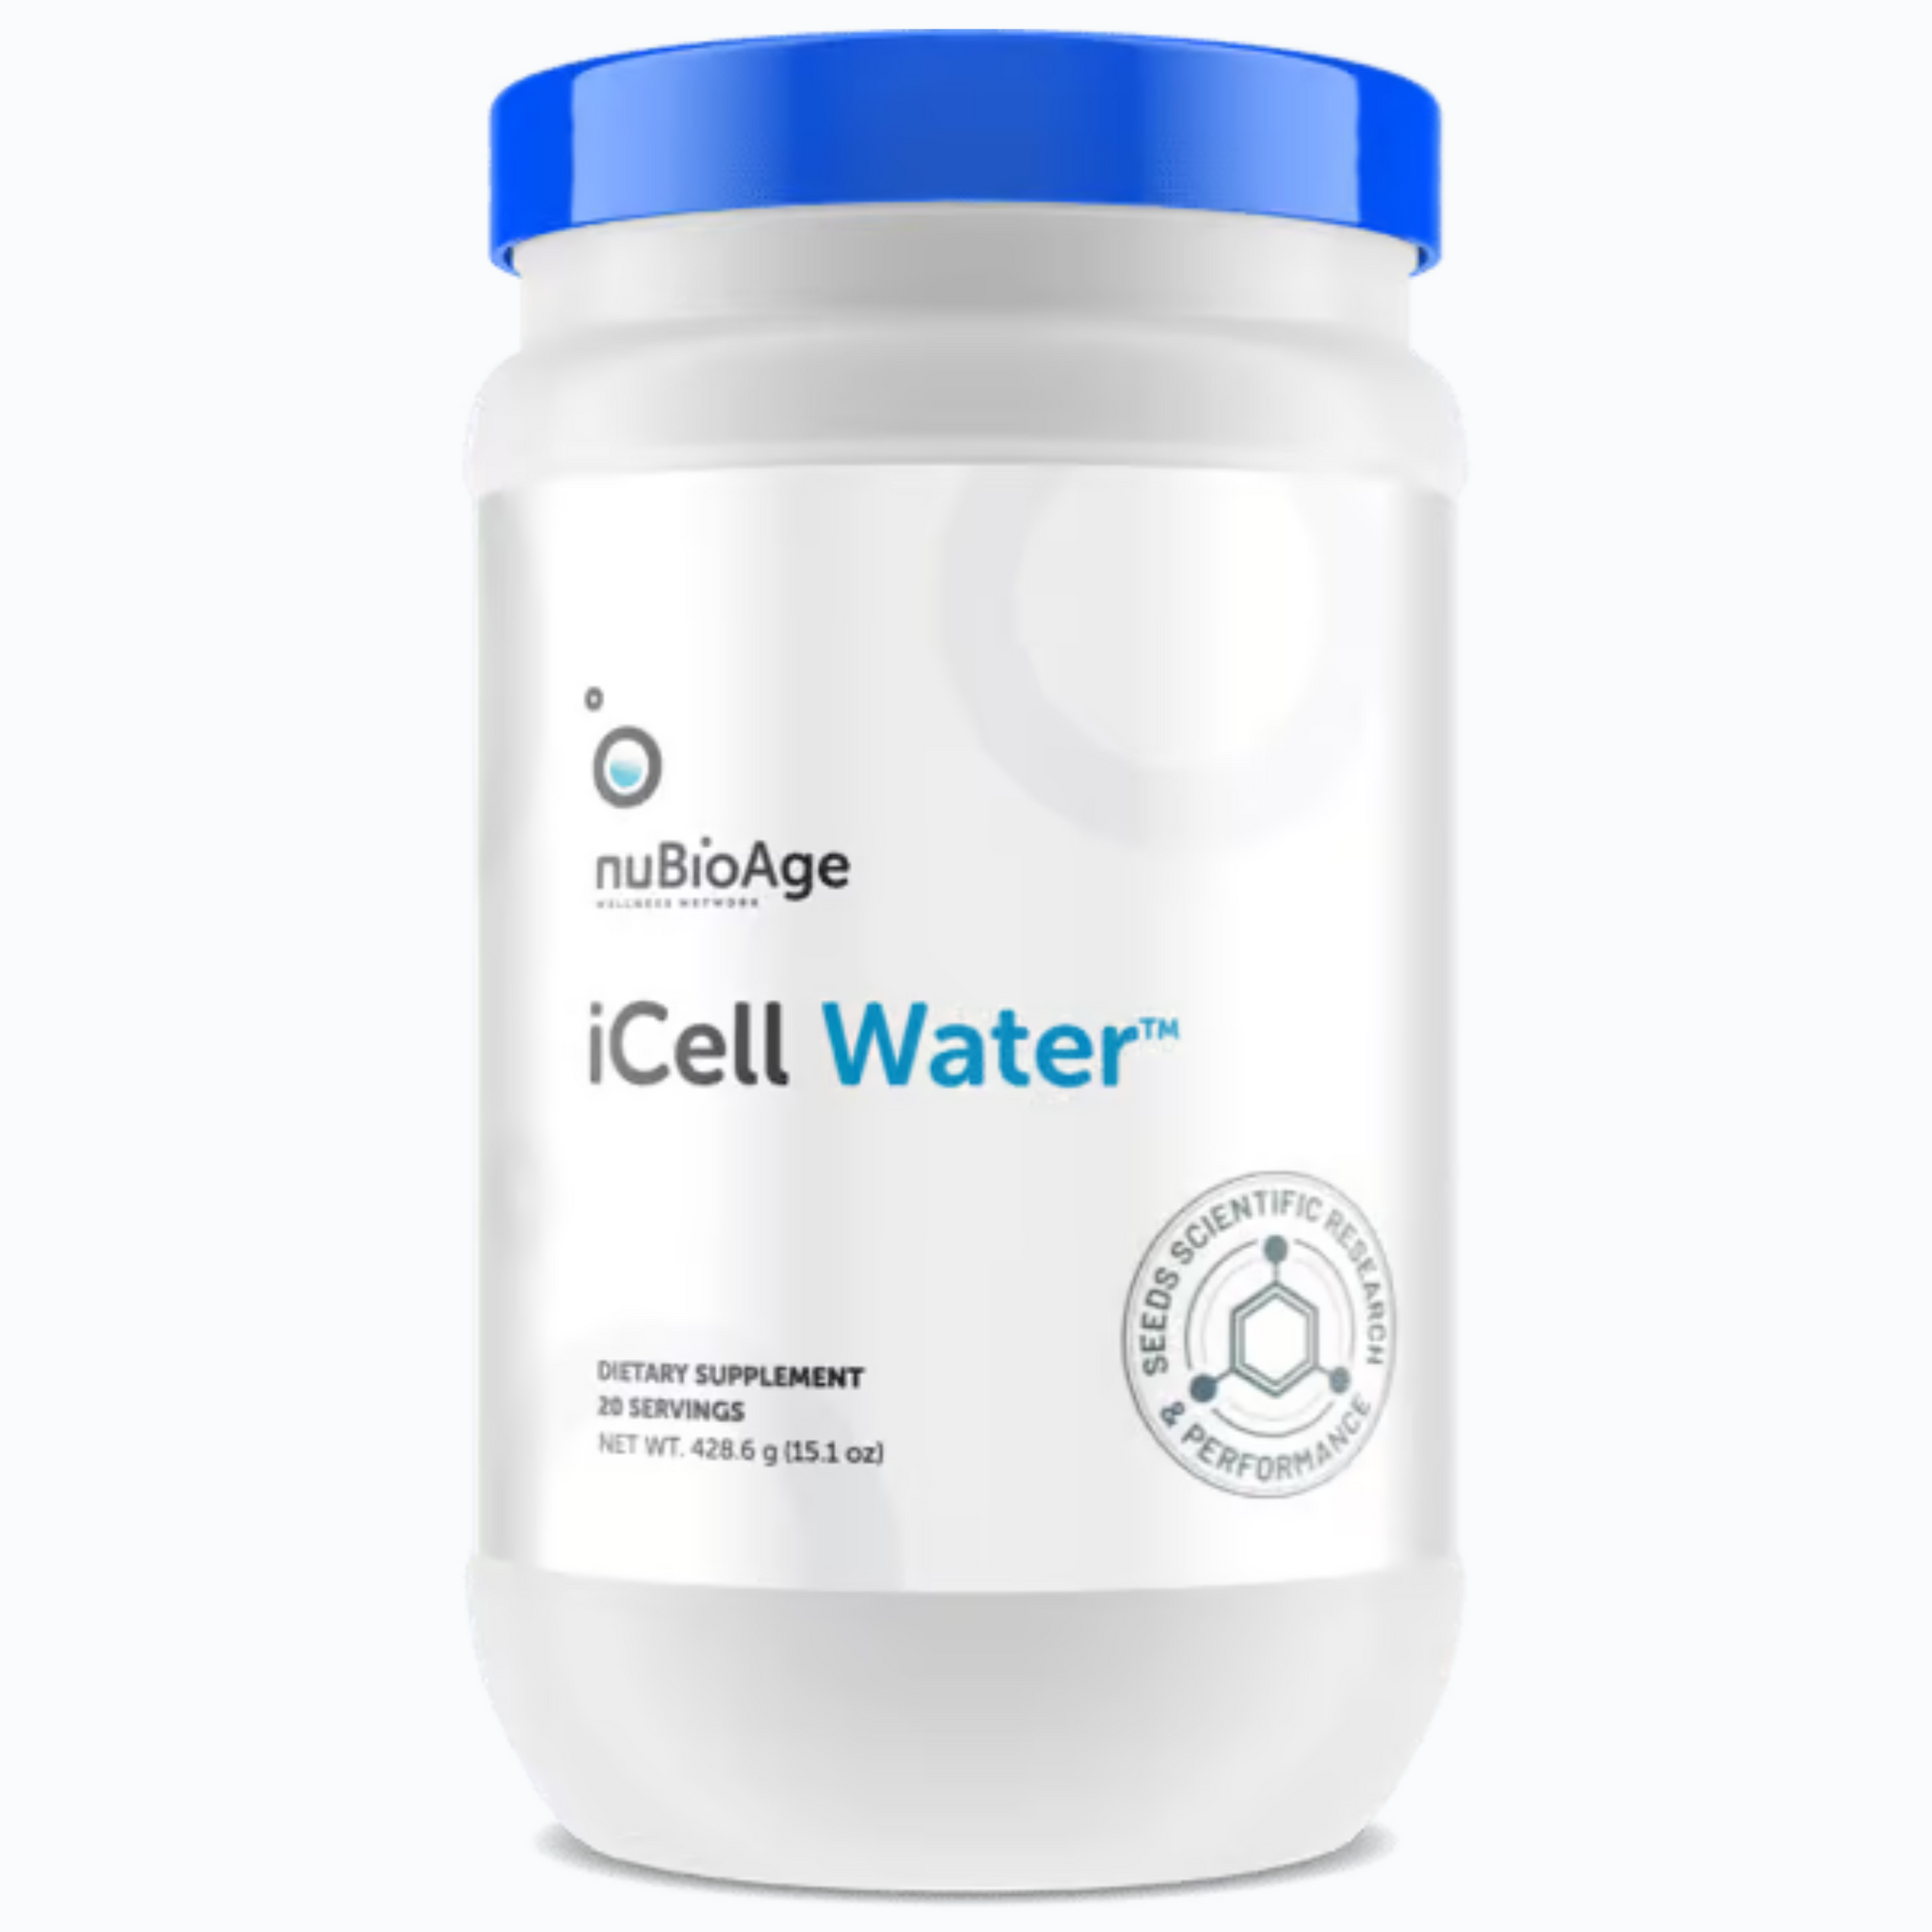 iCell Water Nubioage Supplement